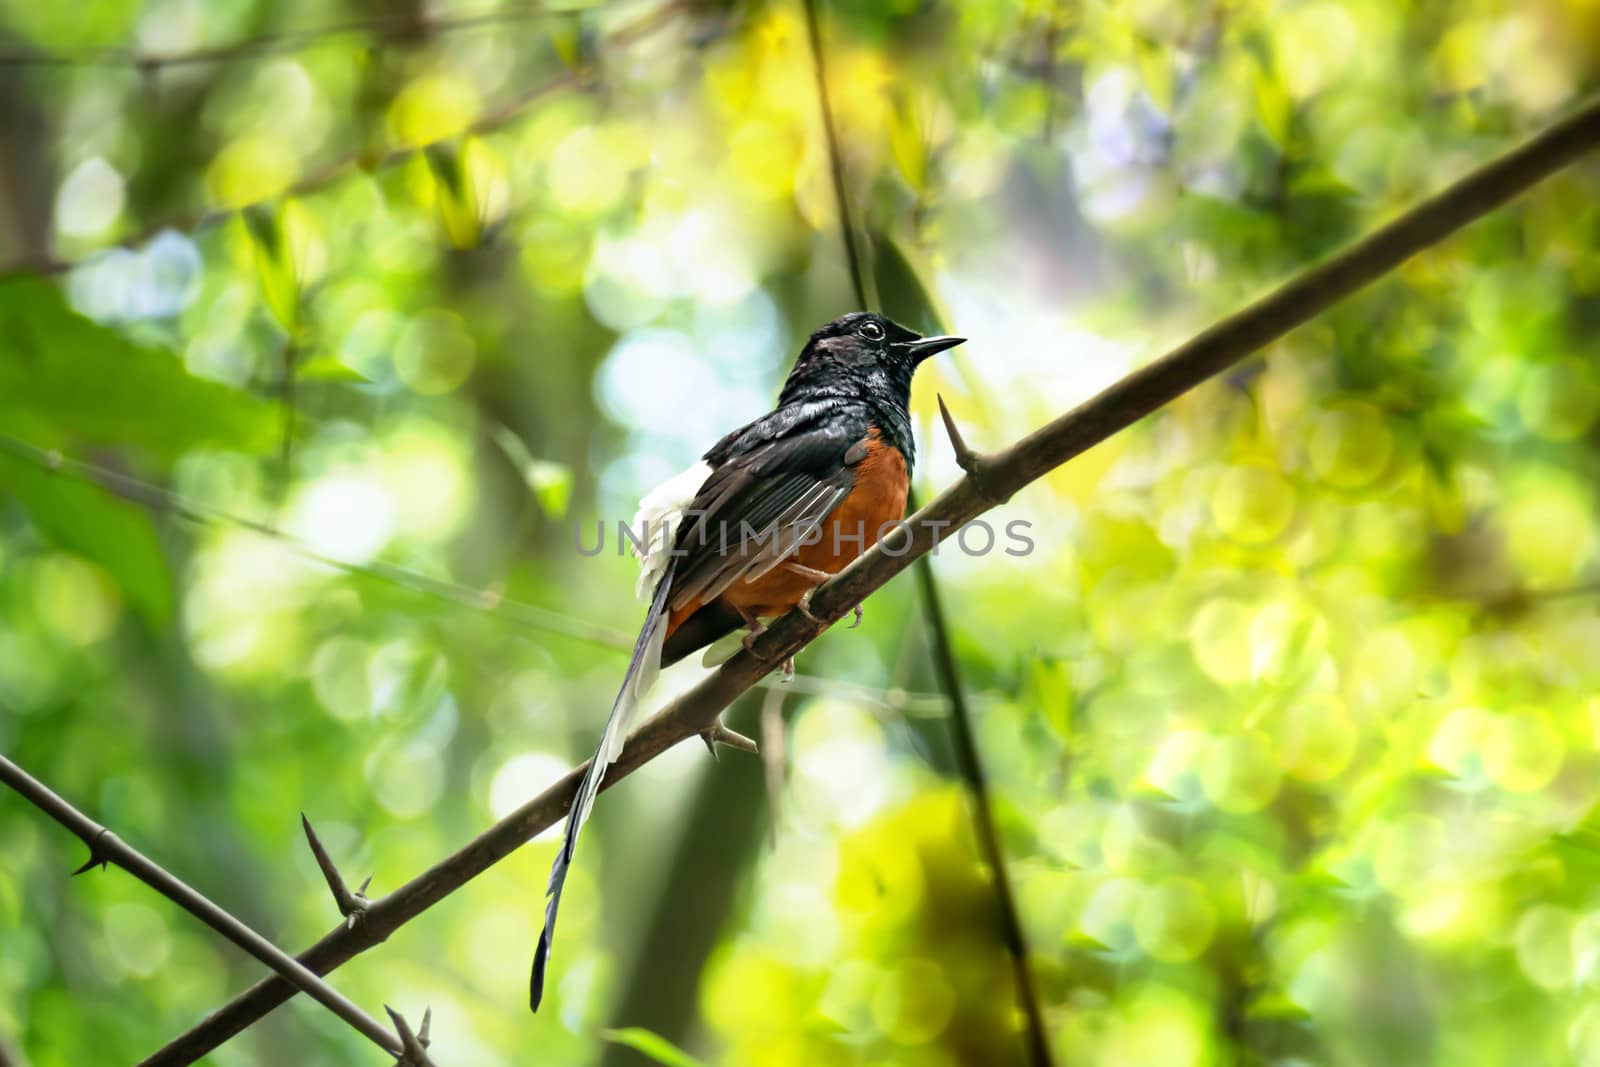 White-rumped shama on a branch in green nature